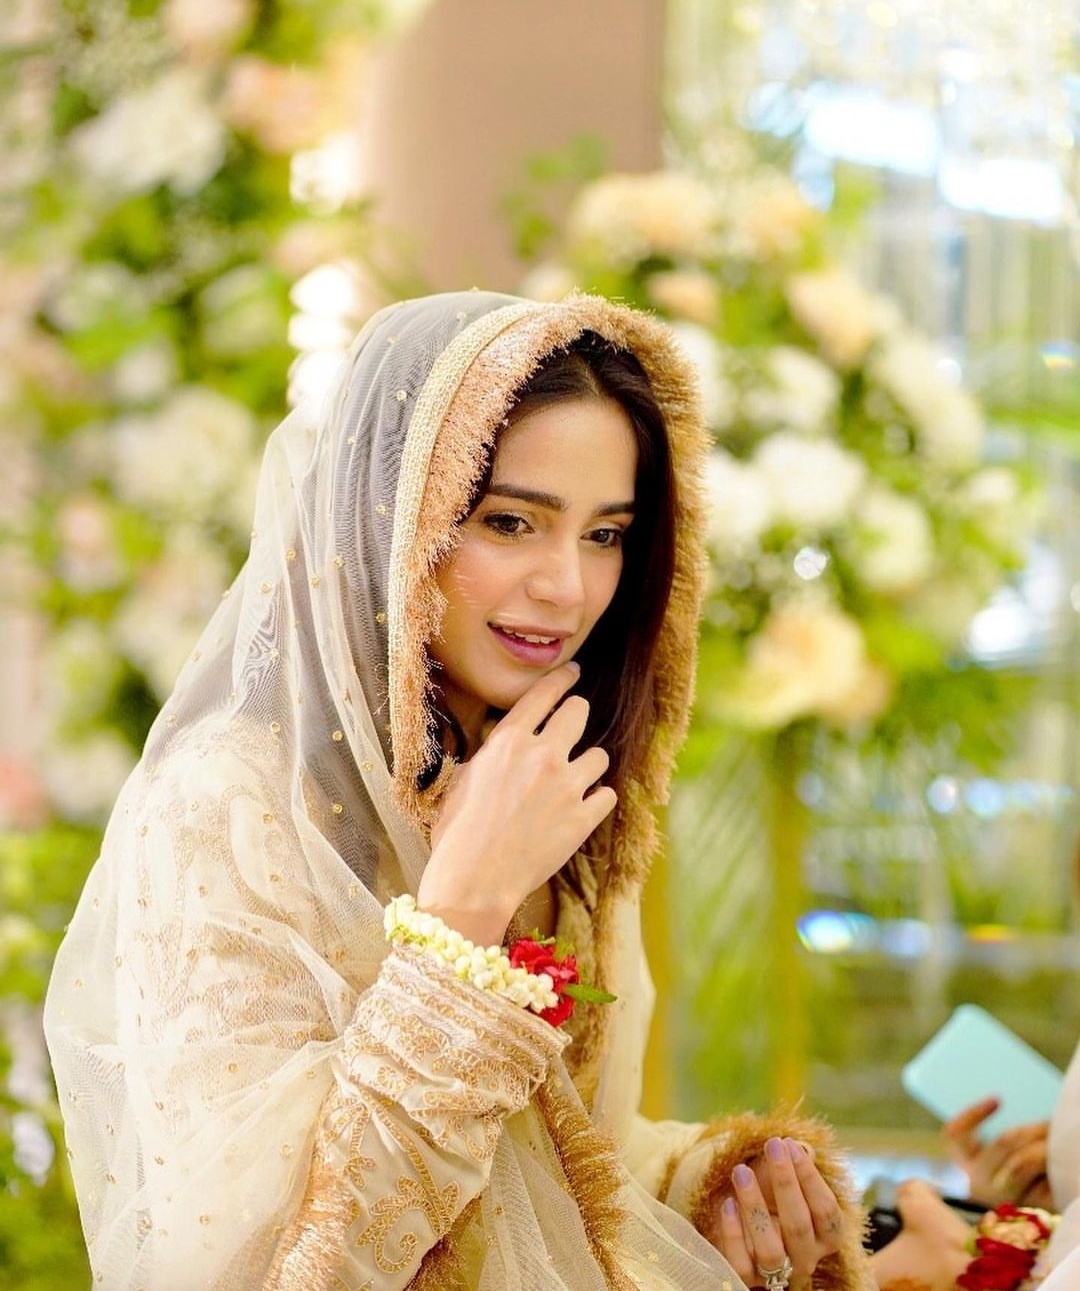 Aima Baig is one of the most Beautiful Pakistani Women in the World